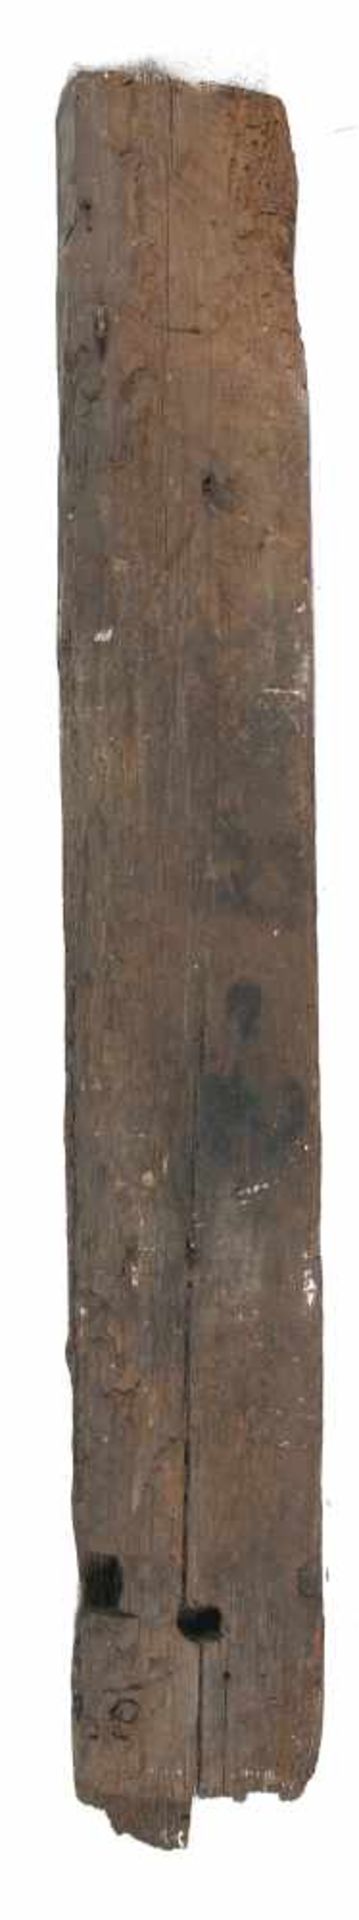 Lot of three carved wooden beams. 17th – 18th century. 115 x 16 x 8 cm., 112 x 19 x 12 cm, and 220 x